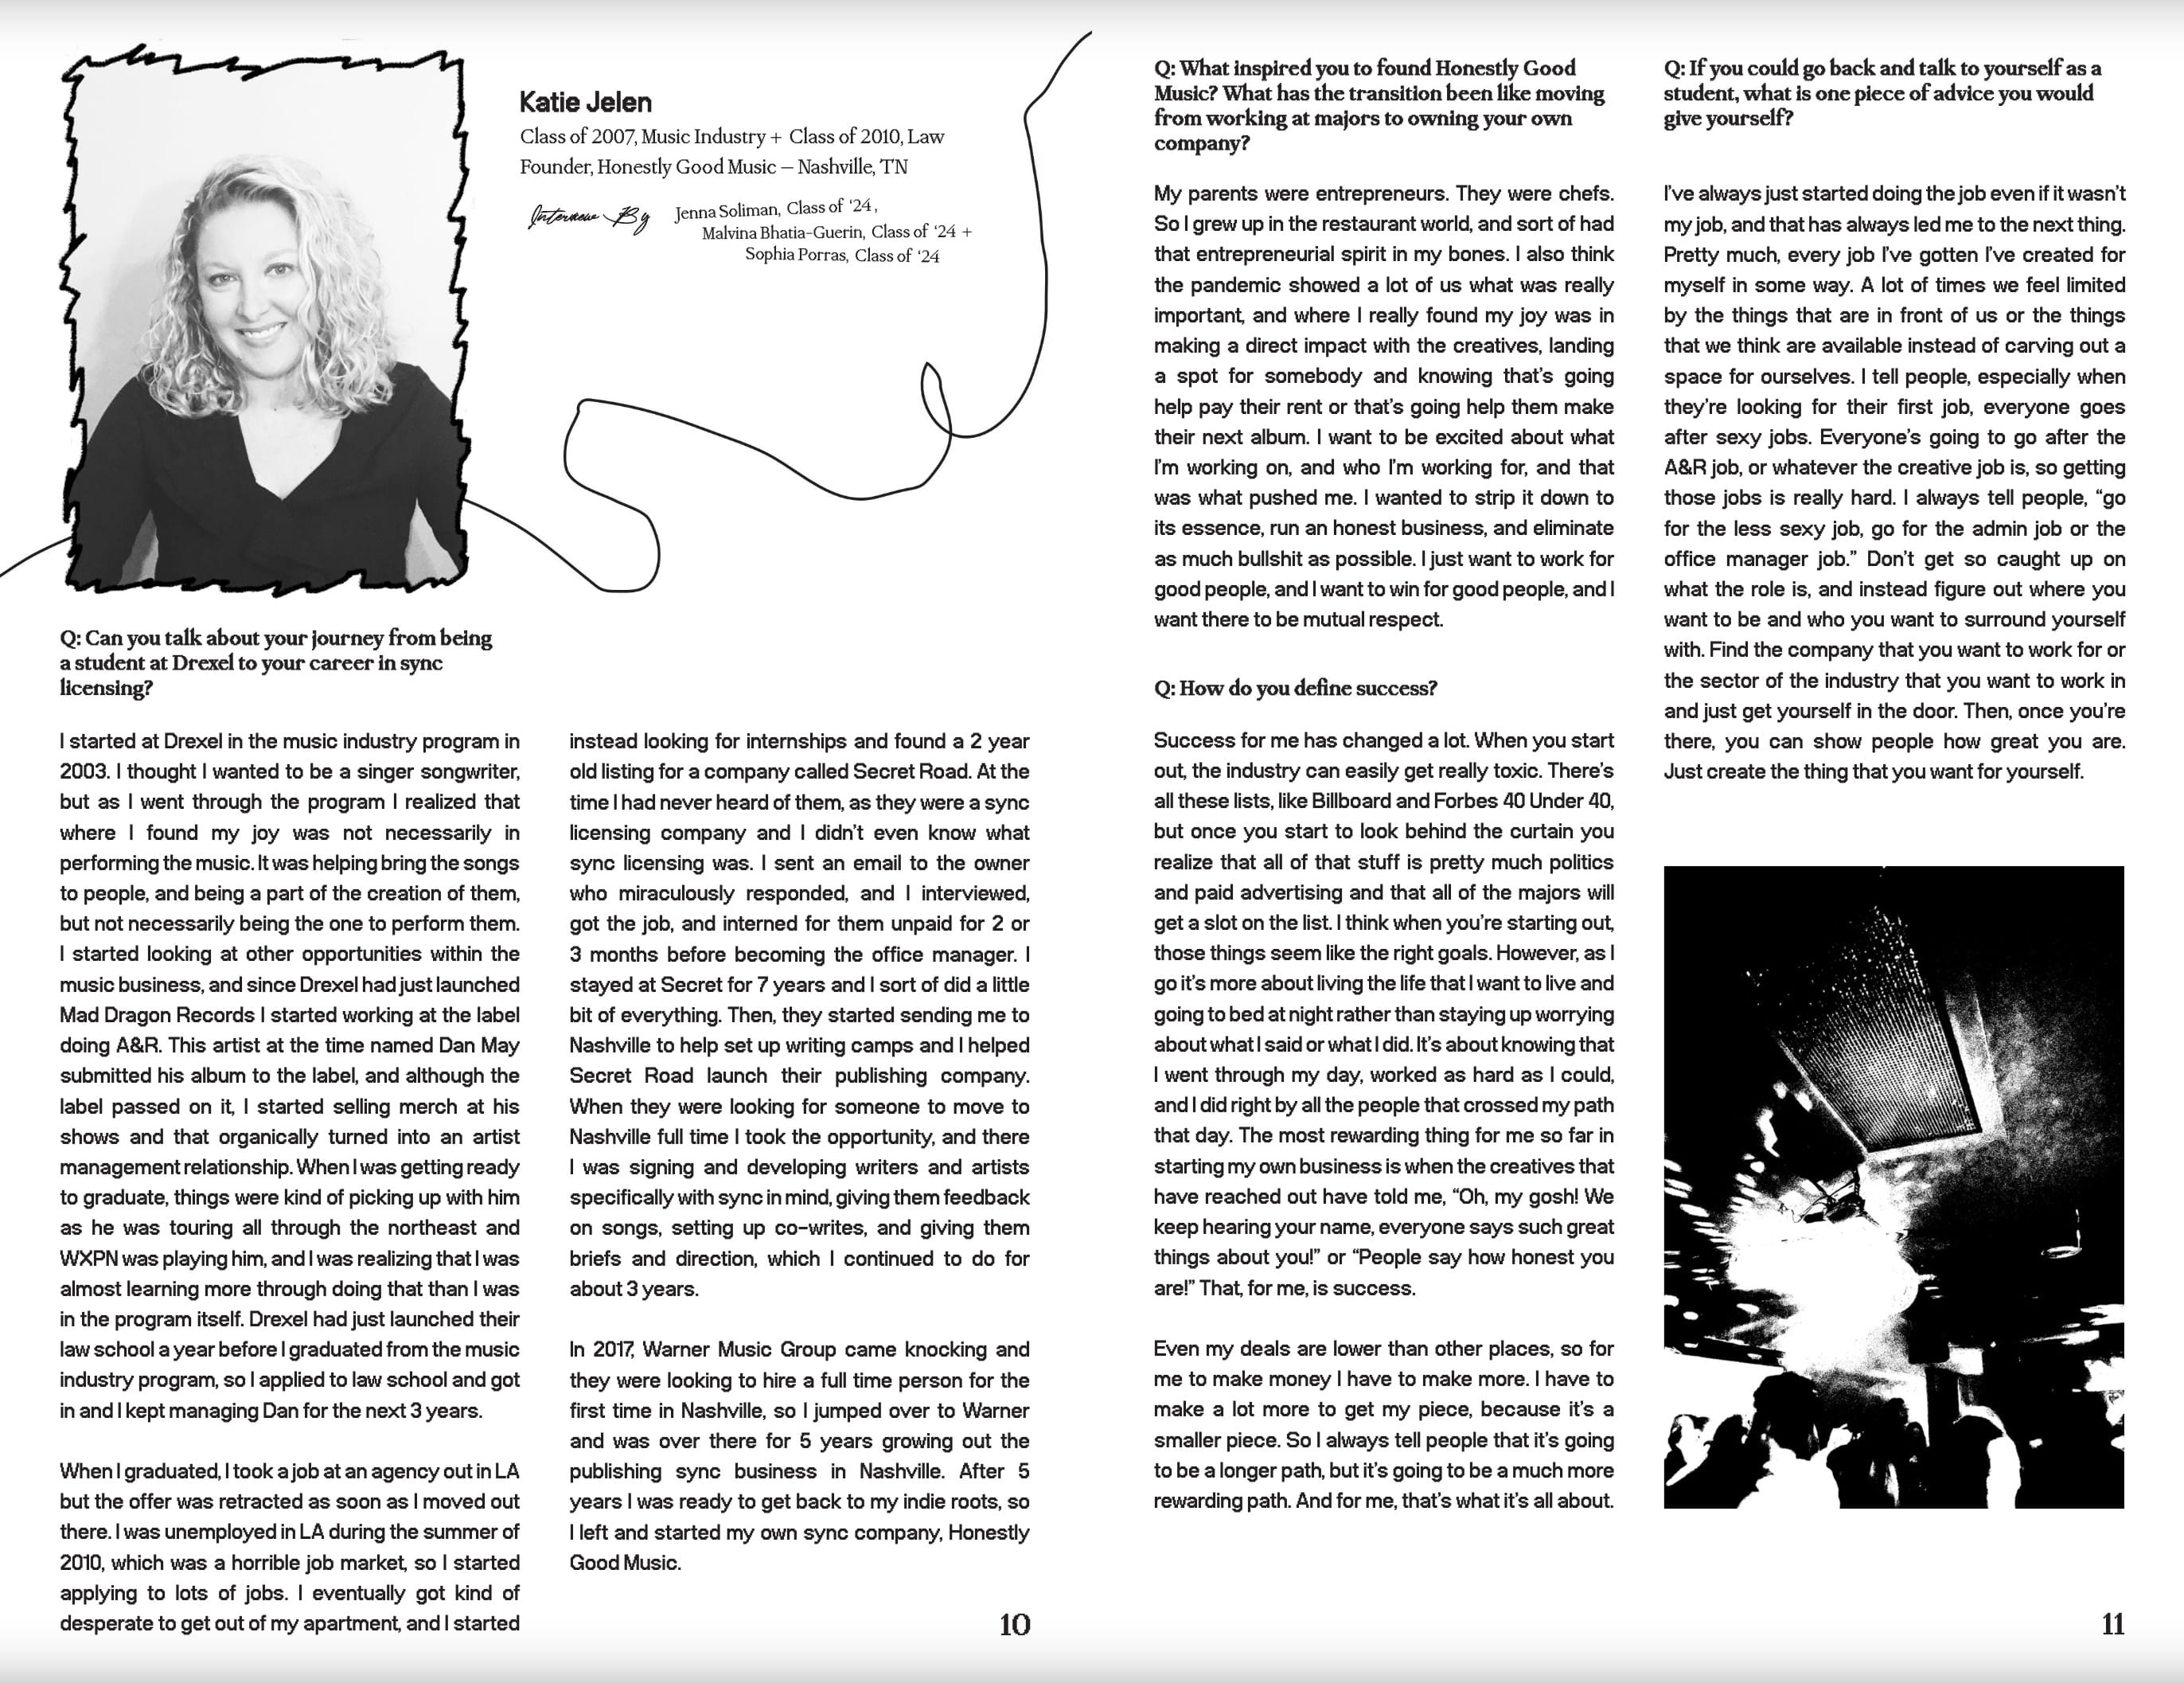 A screenshot of the pages of "Double Platinum" showing a picture of a woman and four columns of text.